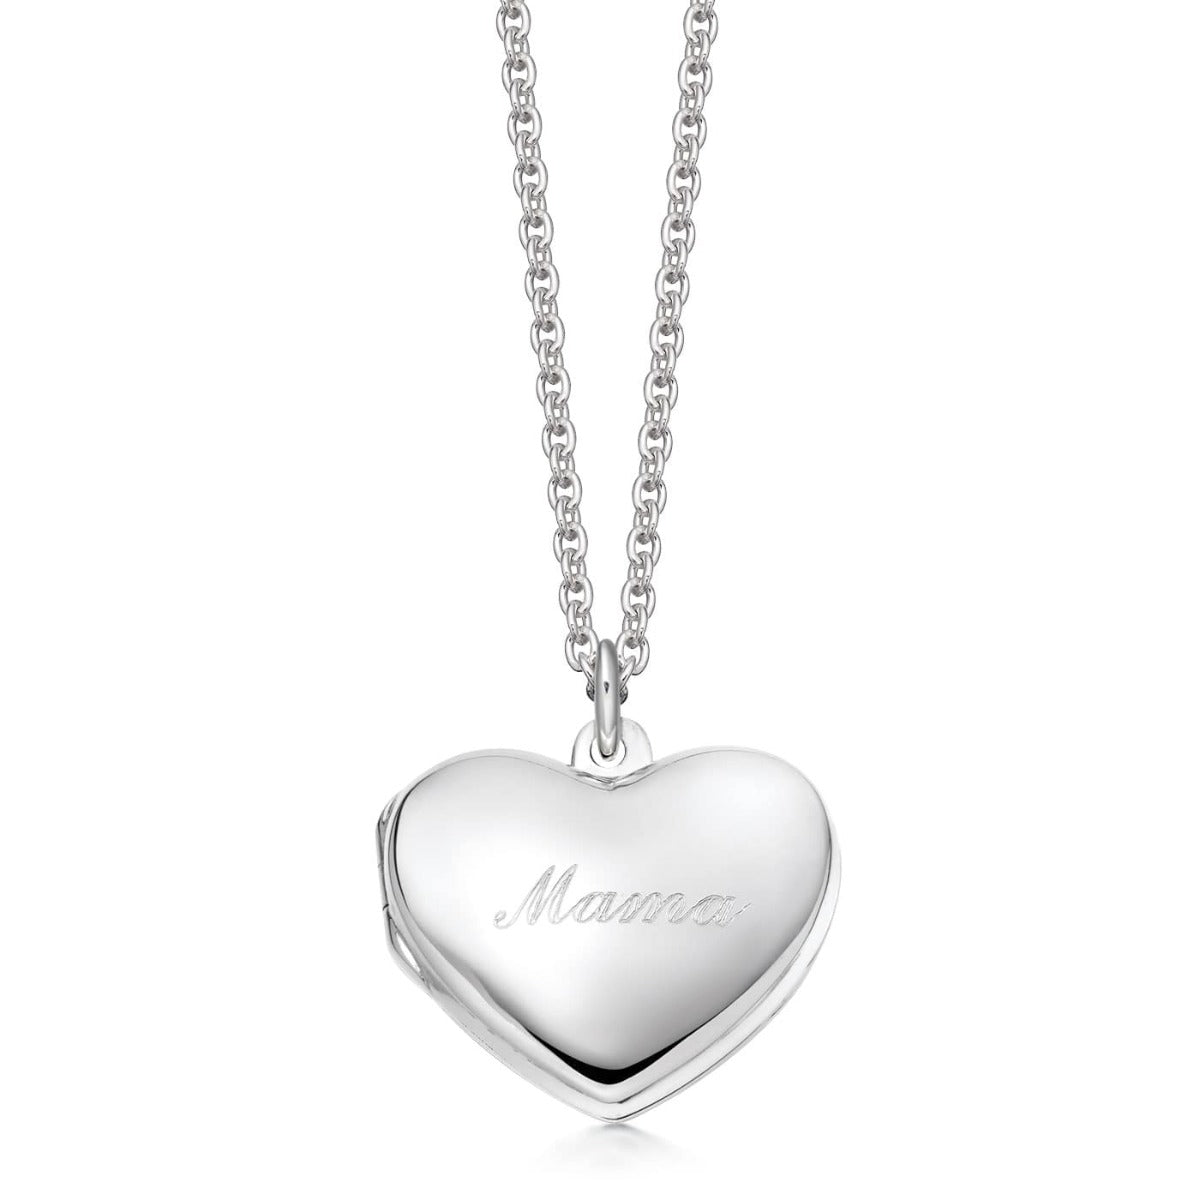 Sterling Silver Classic Heart Locket Pendant Necklace, 19mm Pendant, 18 Box Chain